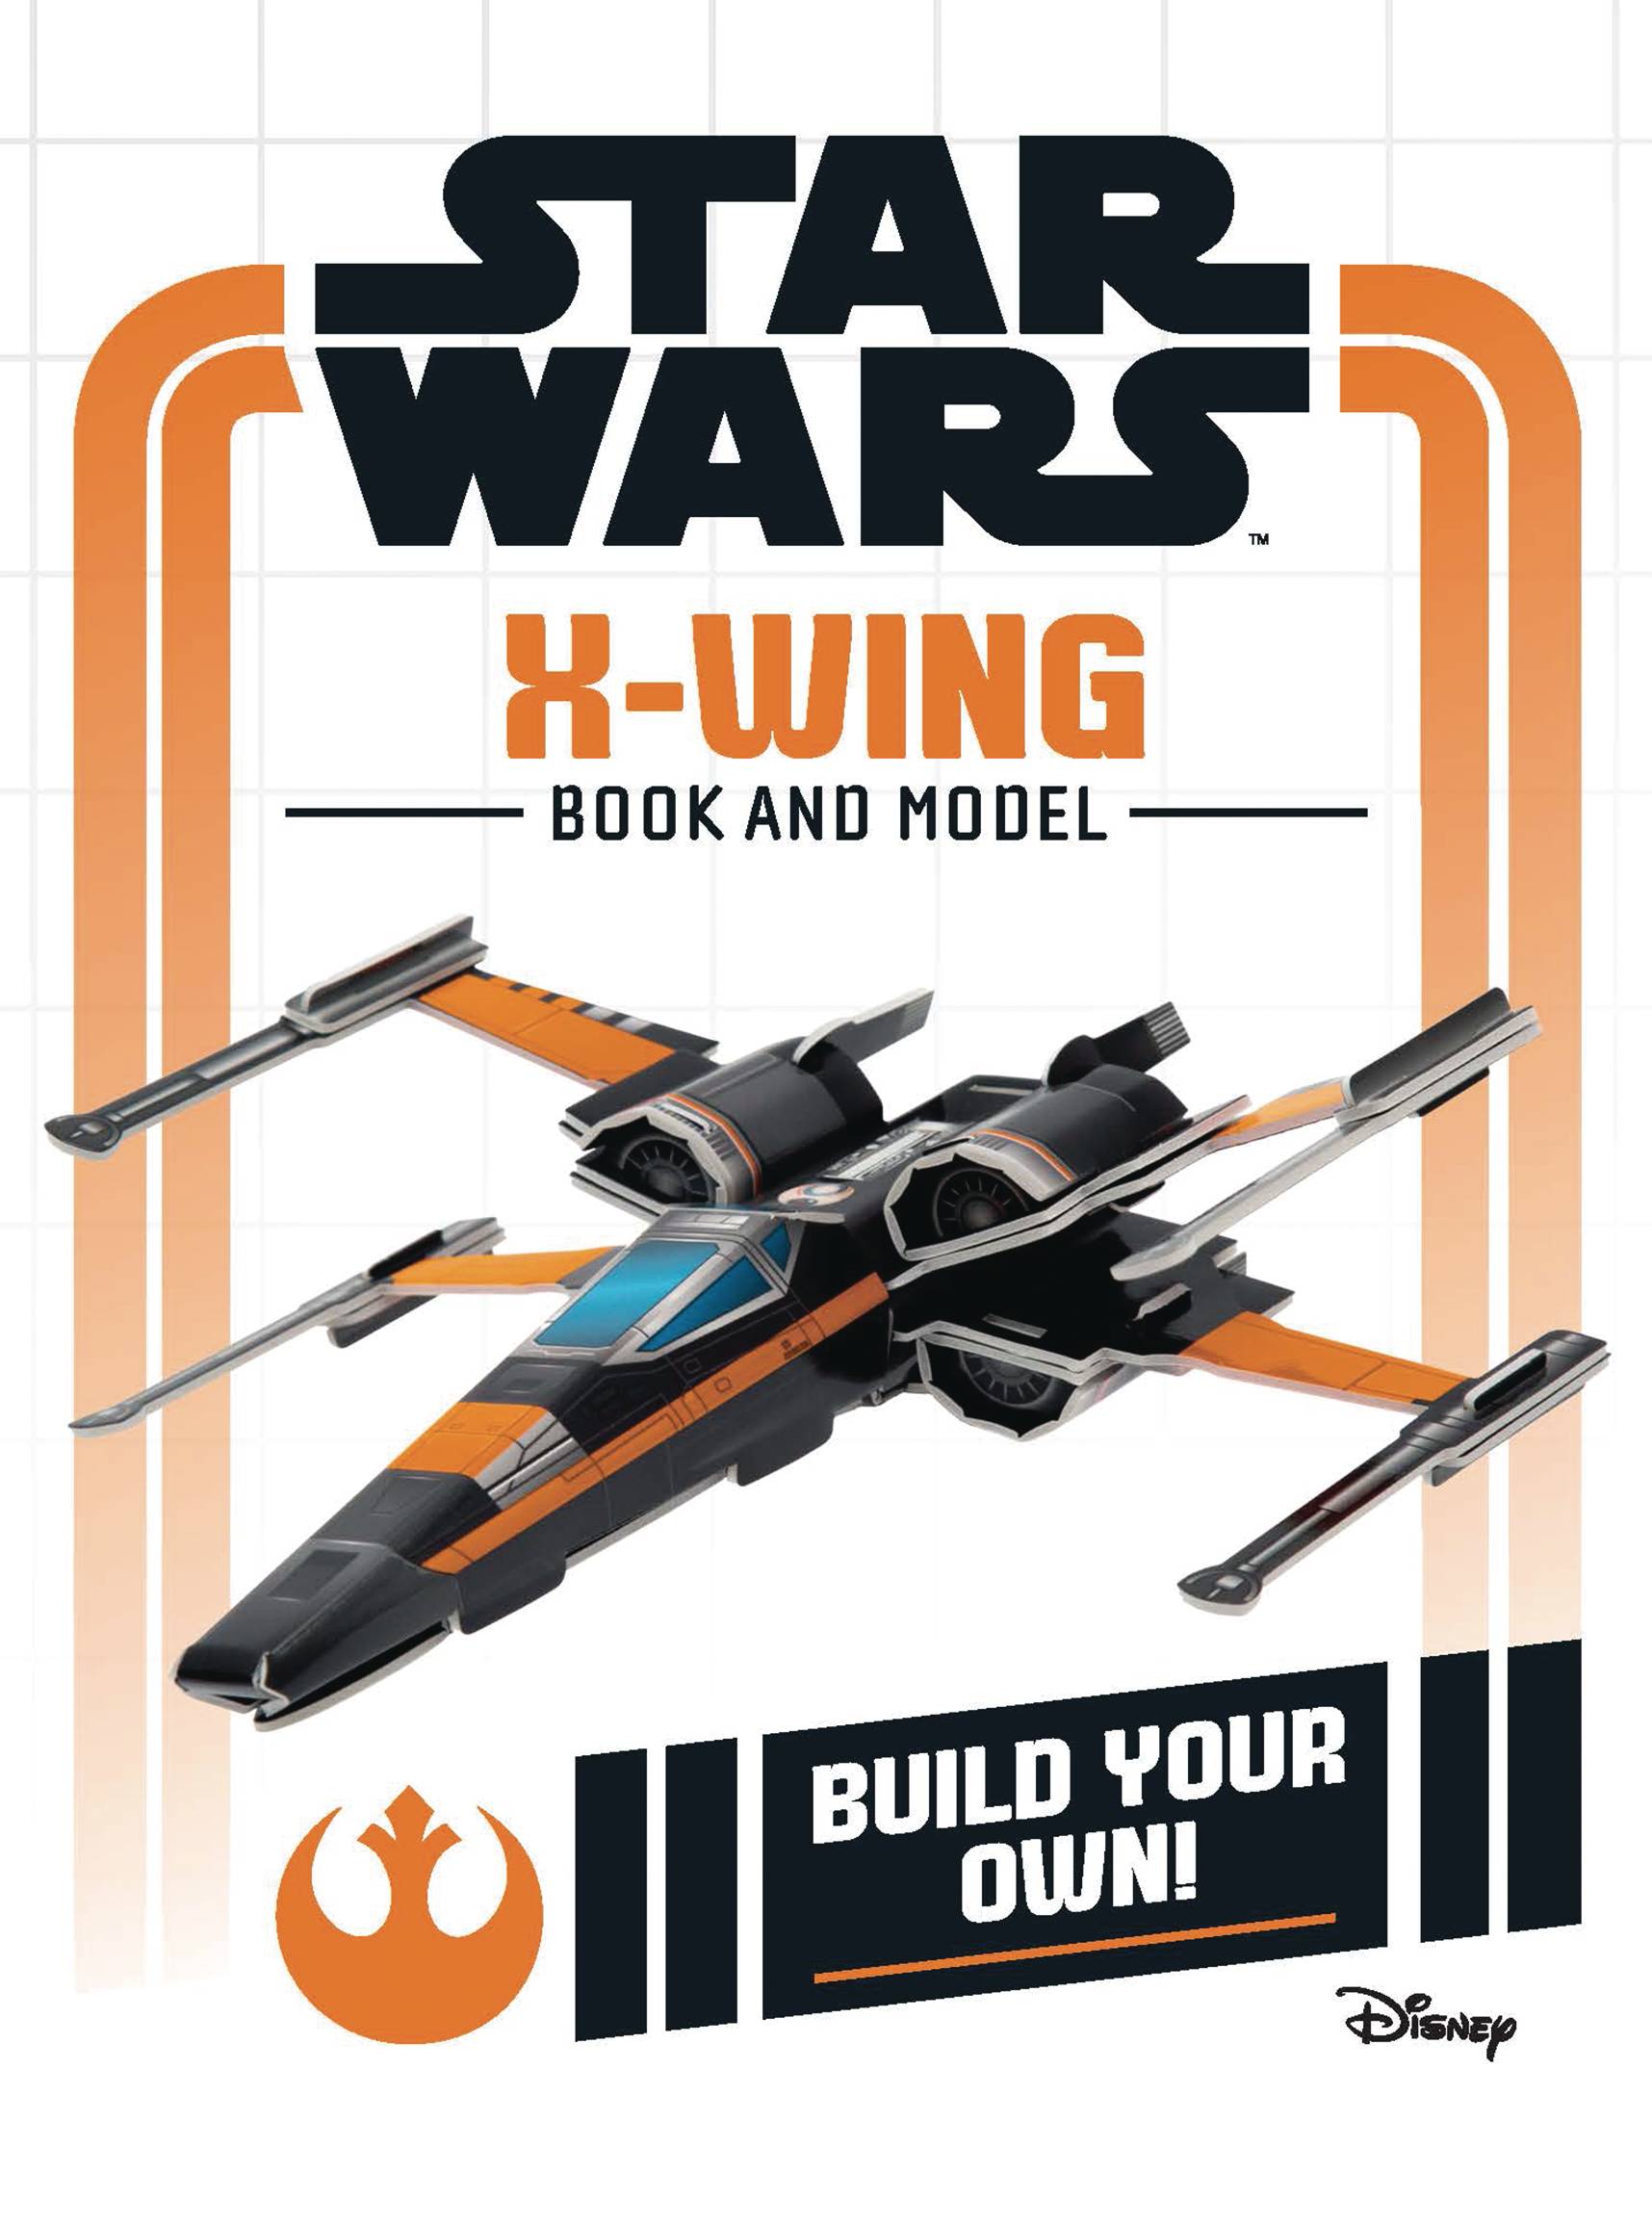 Star Wars Build Your Own X-Wing Hardcover